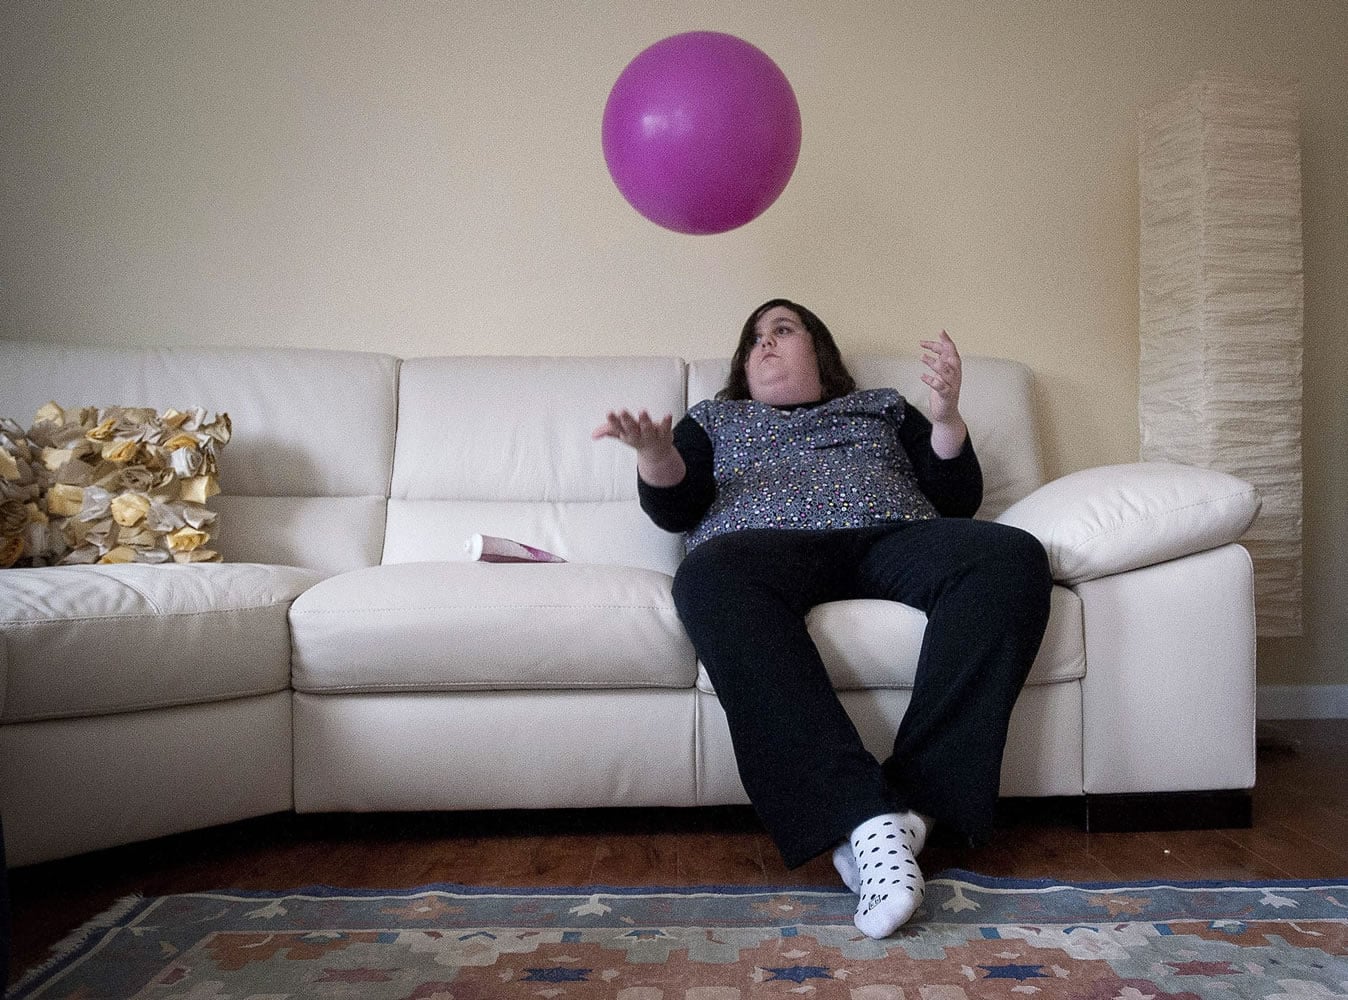 Anna Rolfe plays with a ball Friday while on the couch at her home.